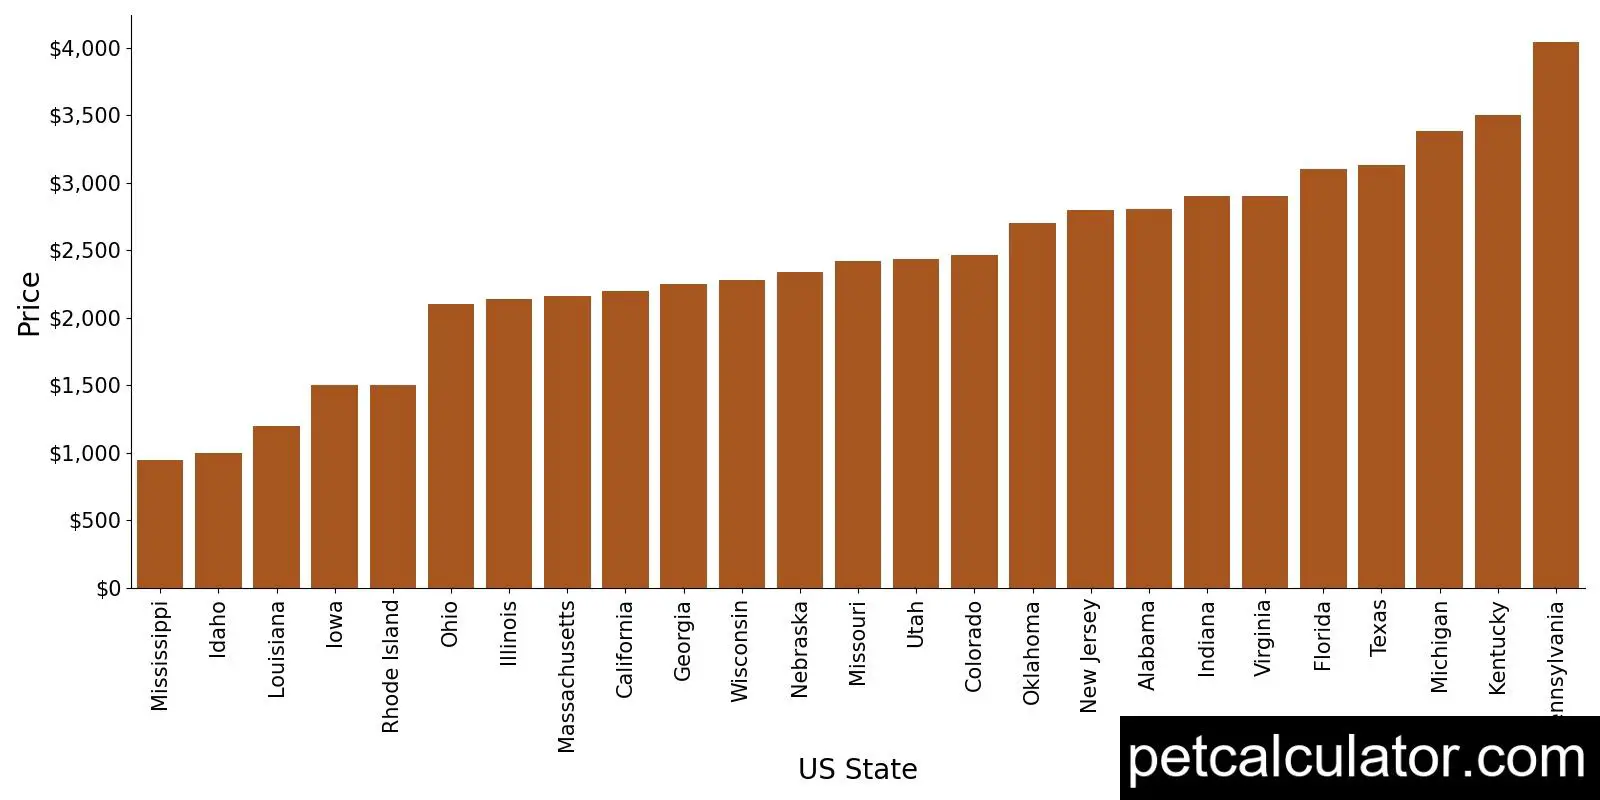 Price of Portuguese Water Dog by US State 